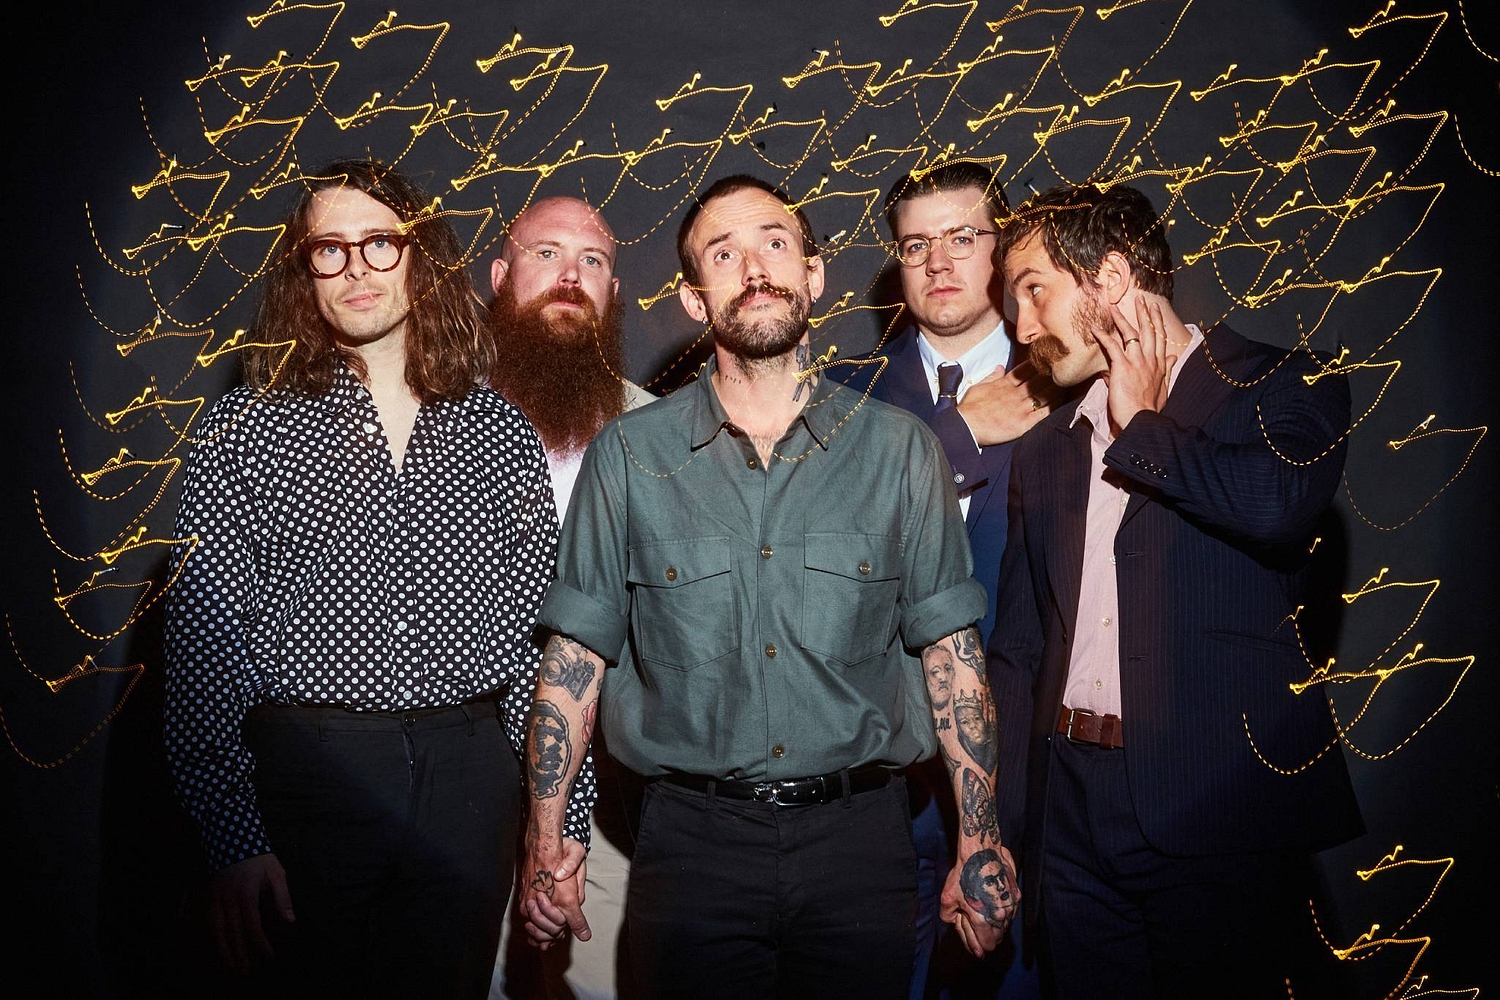 IDLES reveal 'Kill Them With Kindness' video